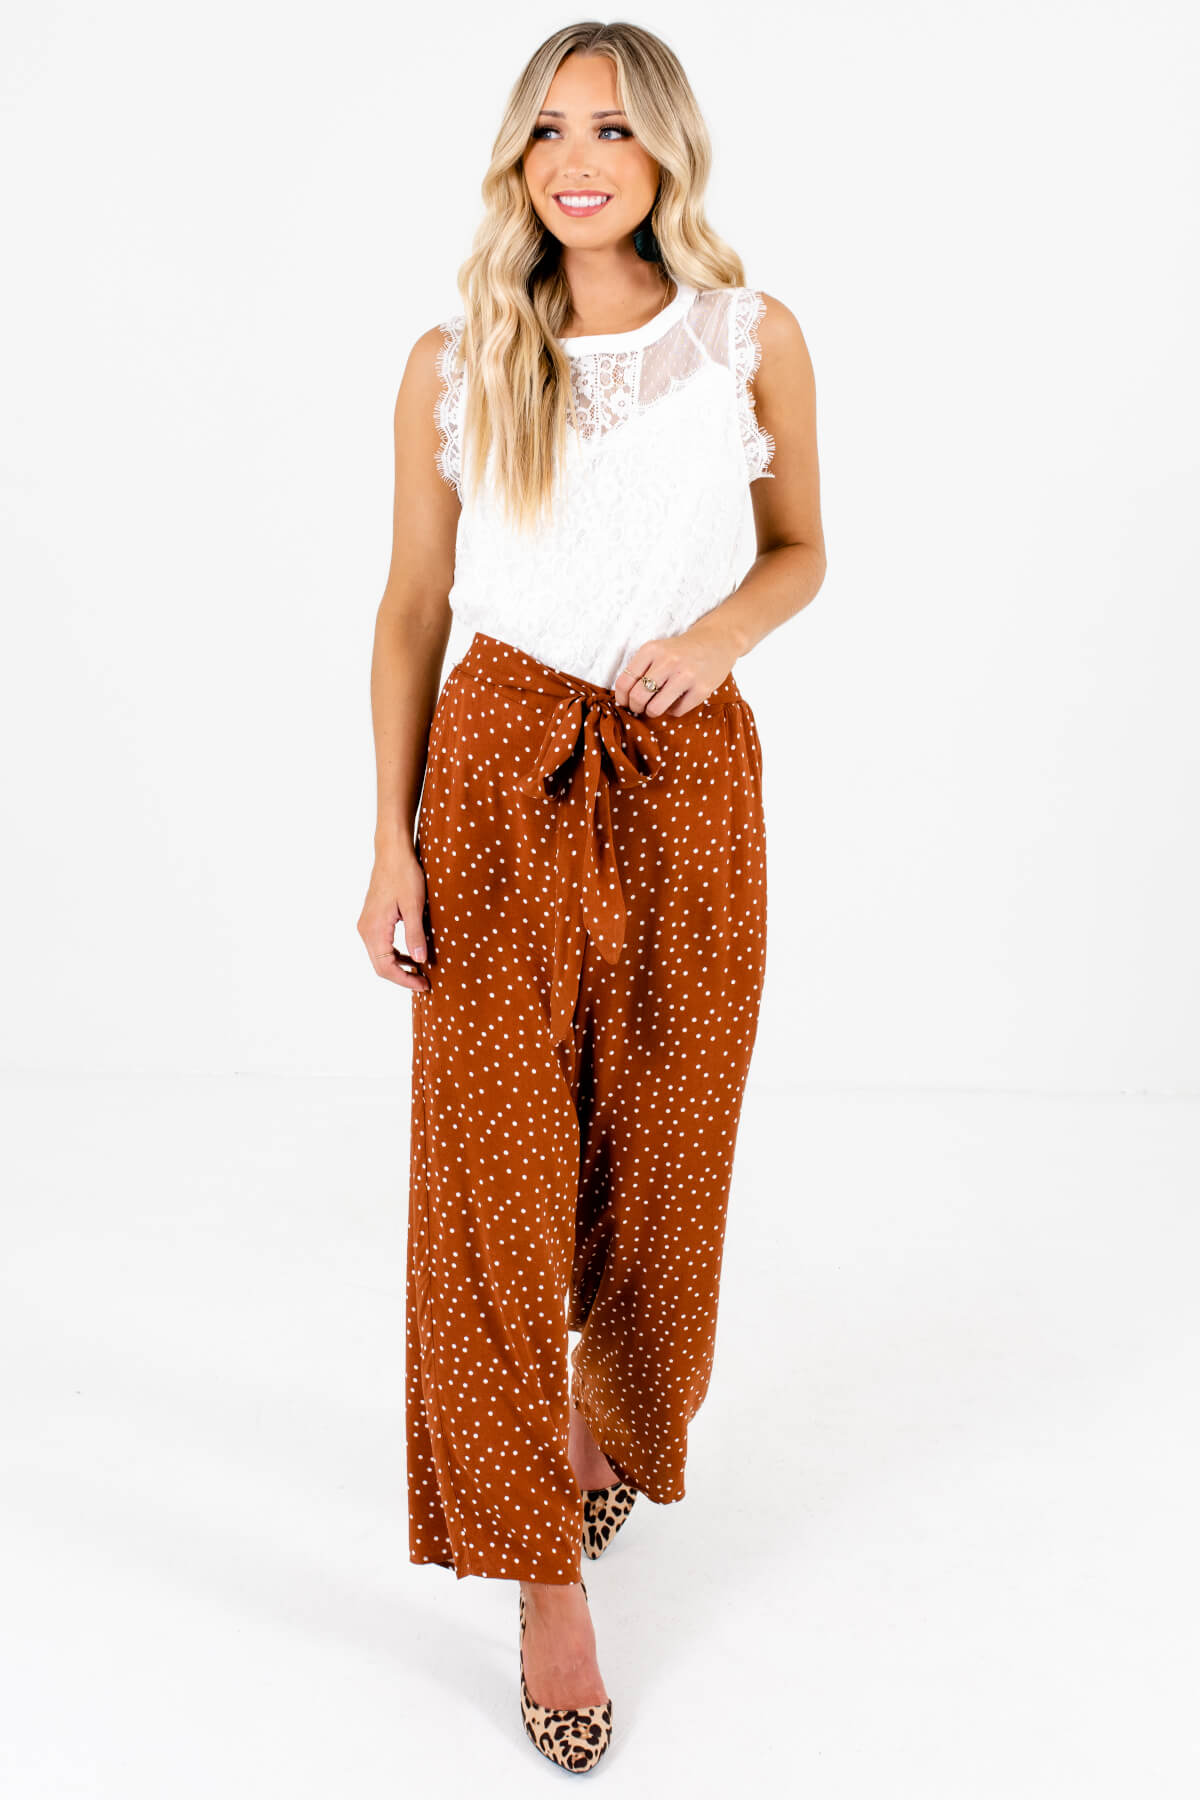 Rust Orange Cute and Comfortable Boutique Pants for Women